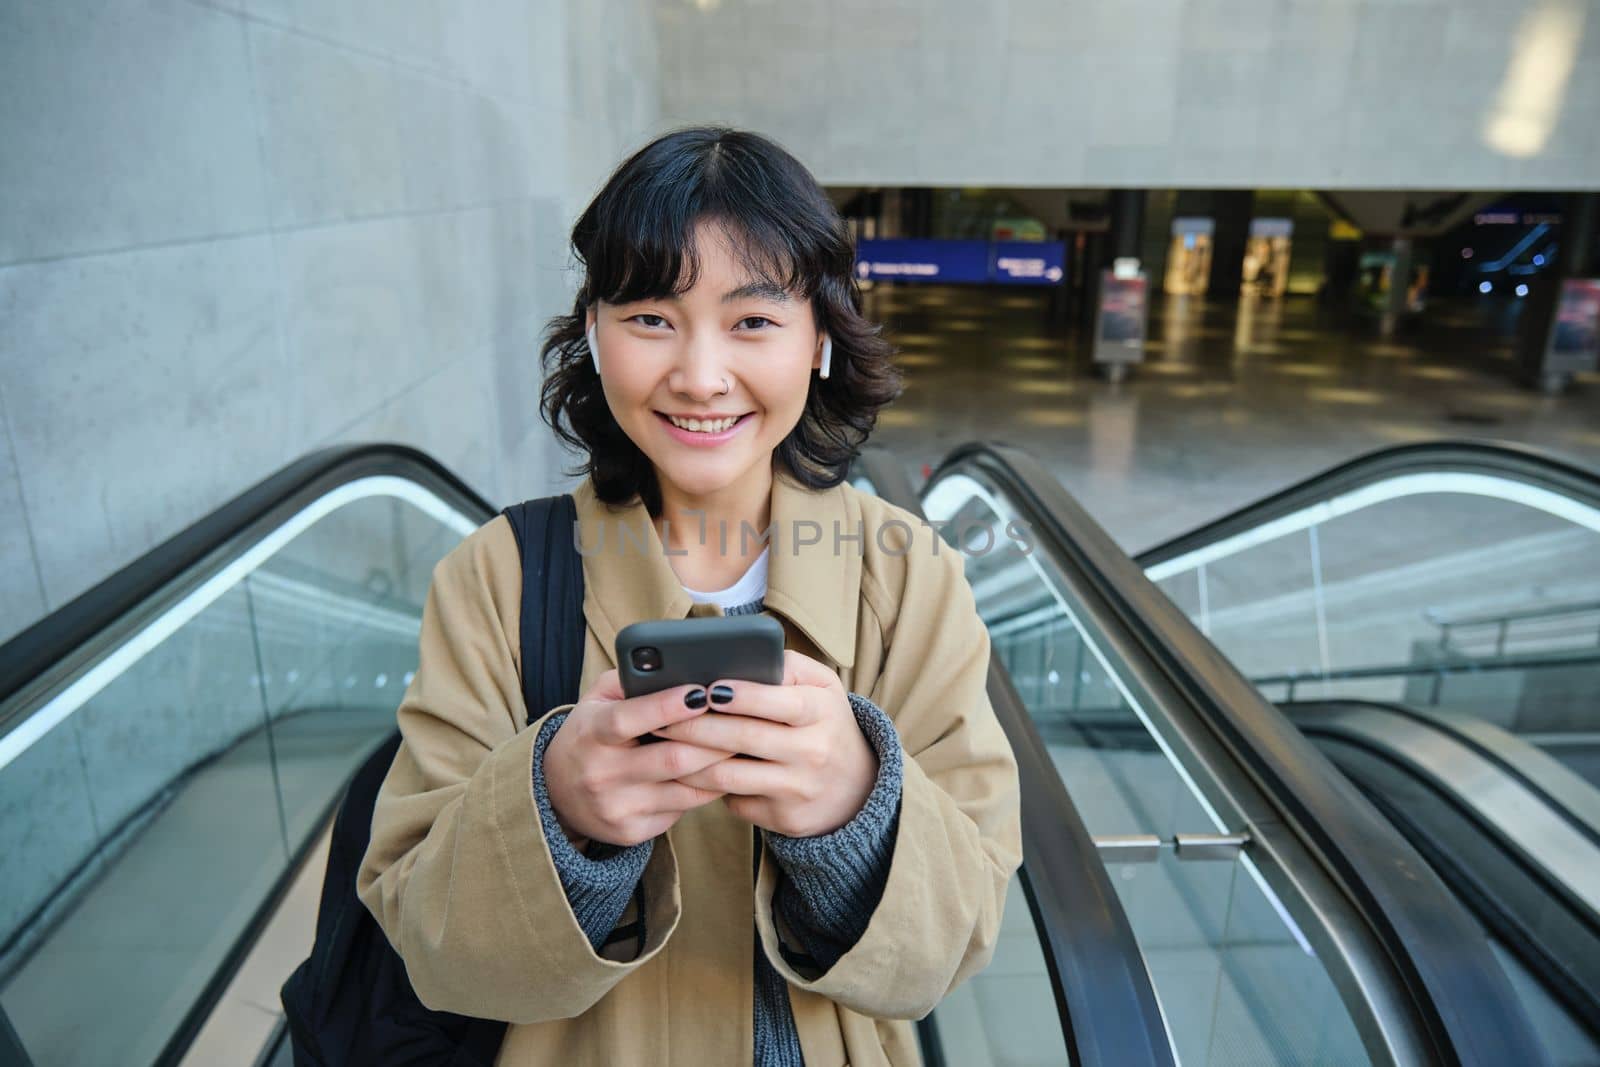 Portrait of cute smiling korean girl, goes up escalator, listens music in wireless earphones and uses mobile phone, holds smartphone.